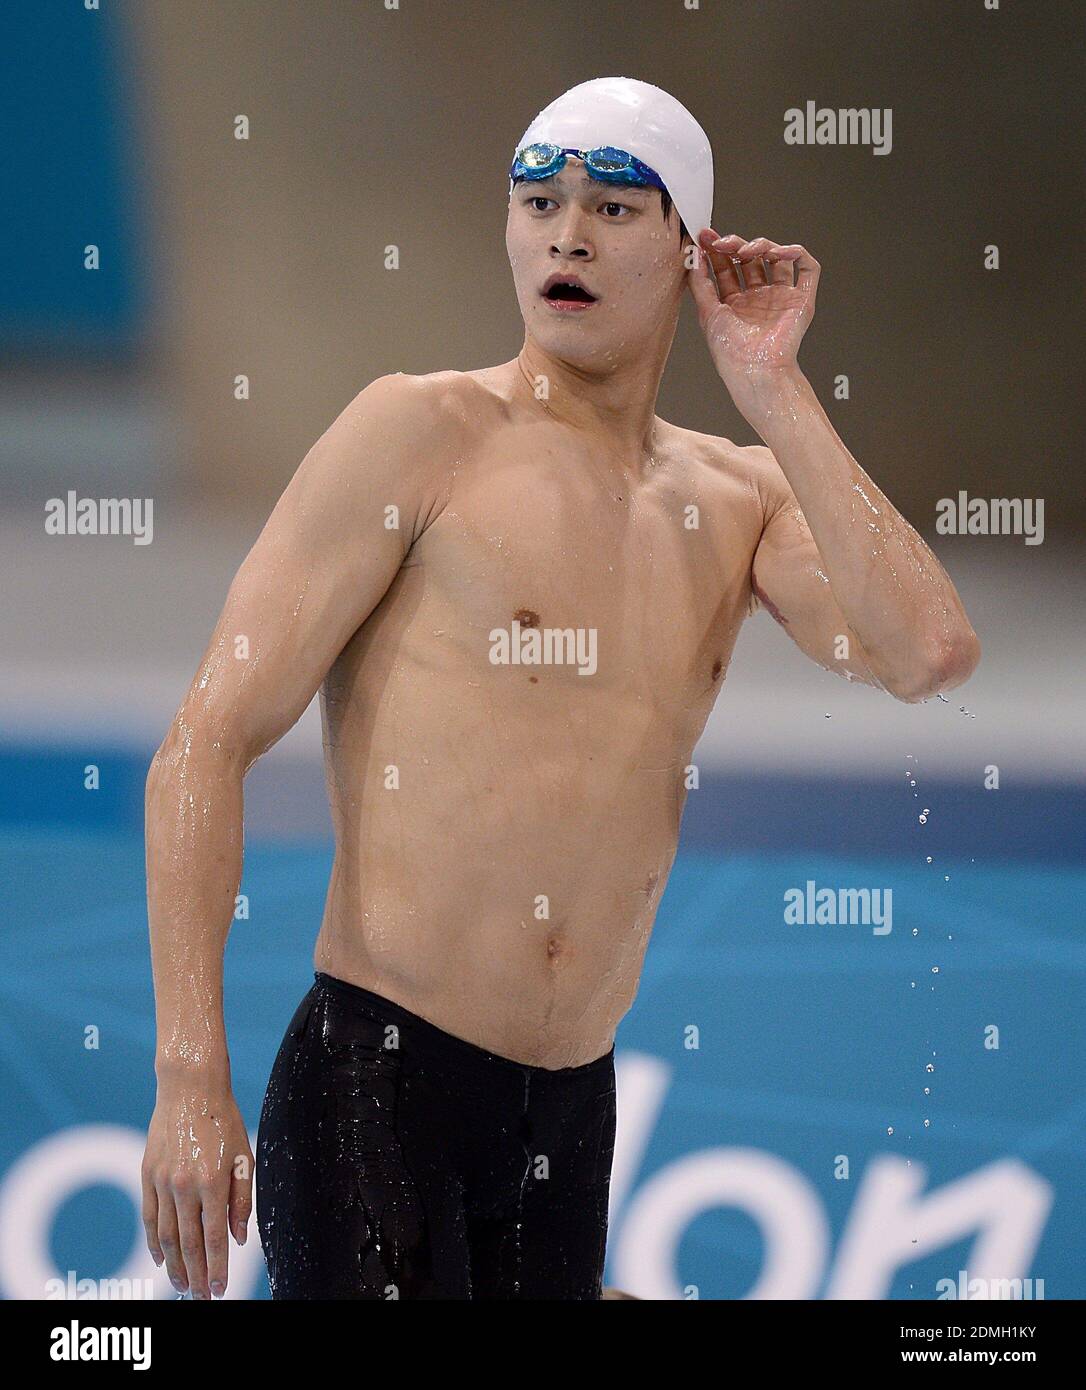 File photo dated 29-07-2012 of China's Sun Yang after winning his Men's 200m Freestyle second Semifinal at the Aquatics Centre, London. Stock Photo